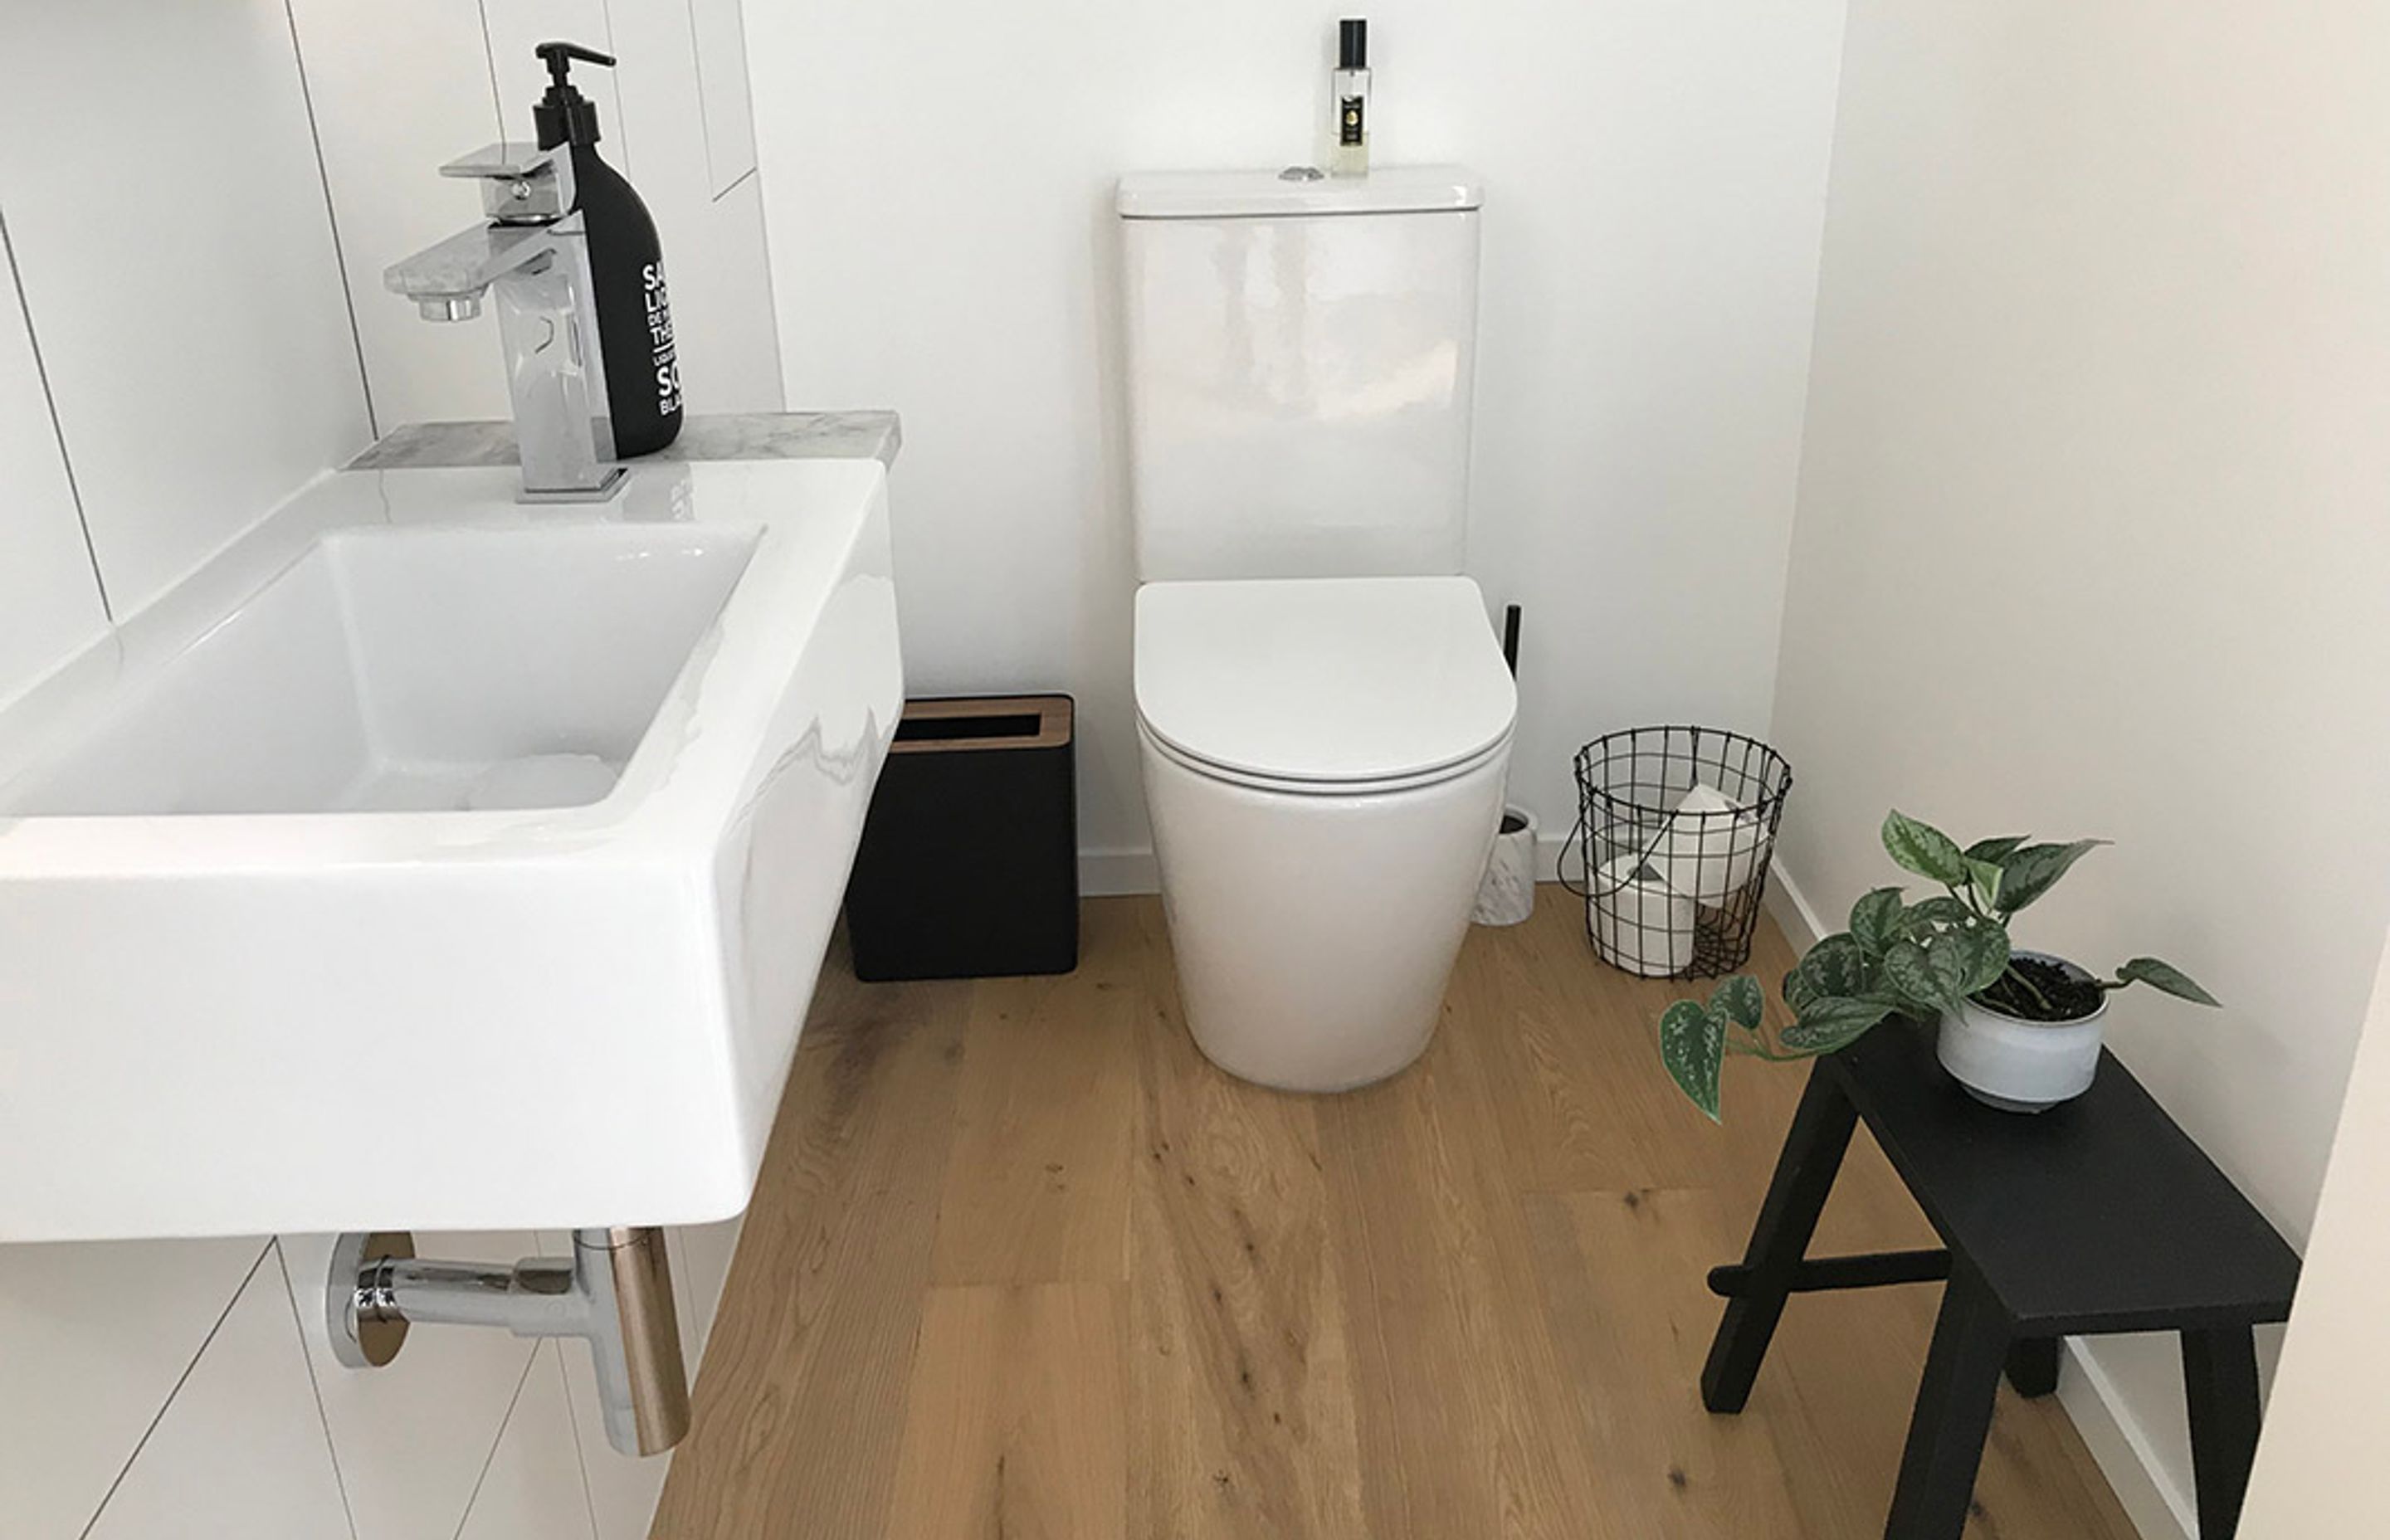 The best flooring options for a bathroom